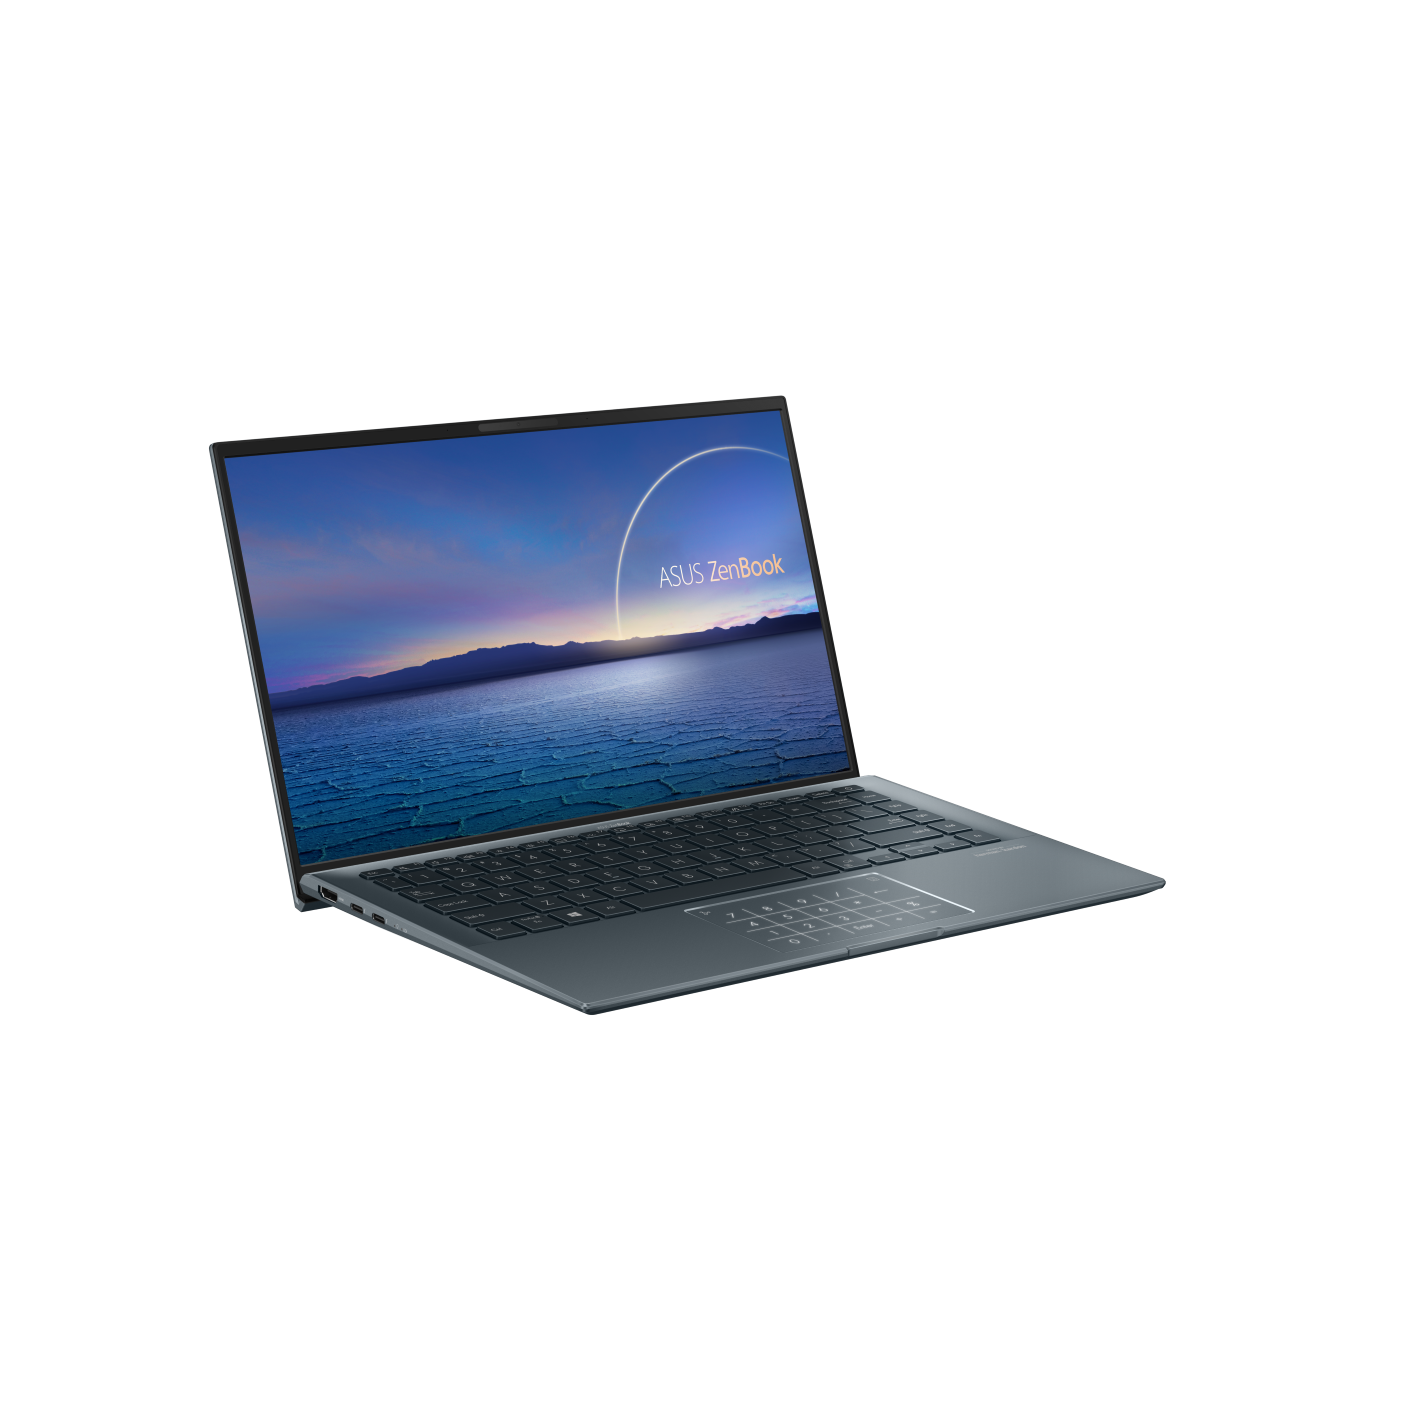 Tickling Accurate Medal Asus ZenBook 14 Ultralight packs Core i7, Intel Xe or Nvidia GeForce MX450  graphics, and Thunderbolt 4 in a <1 kg package - NotebookCheck.net News